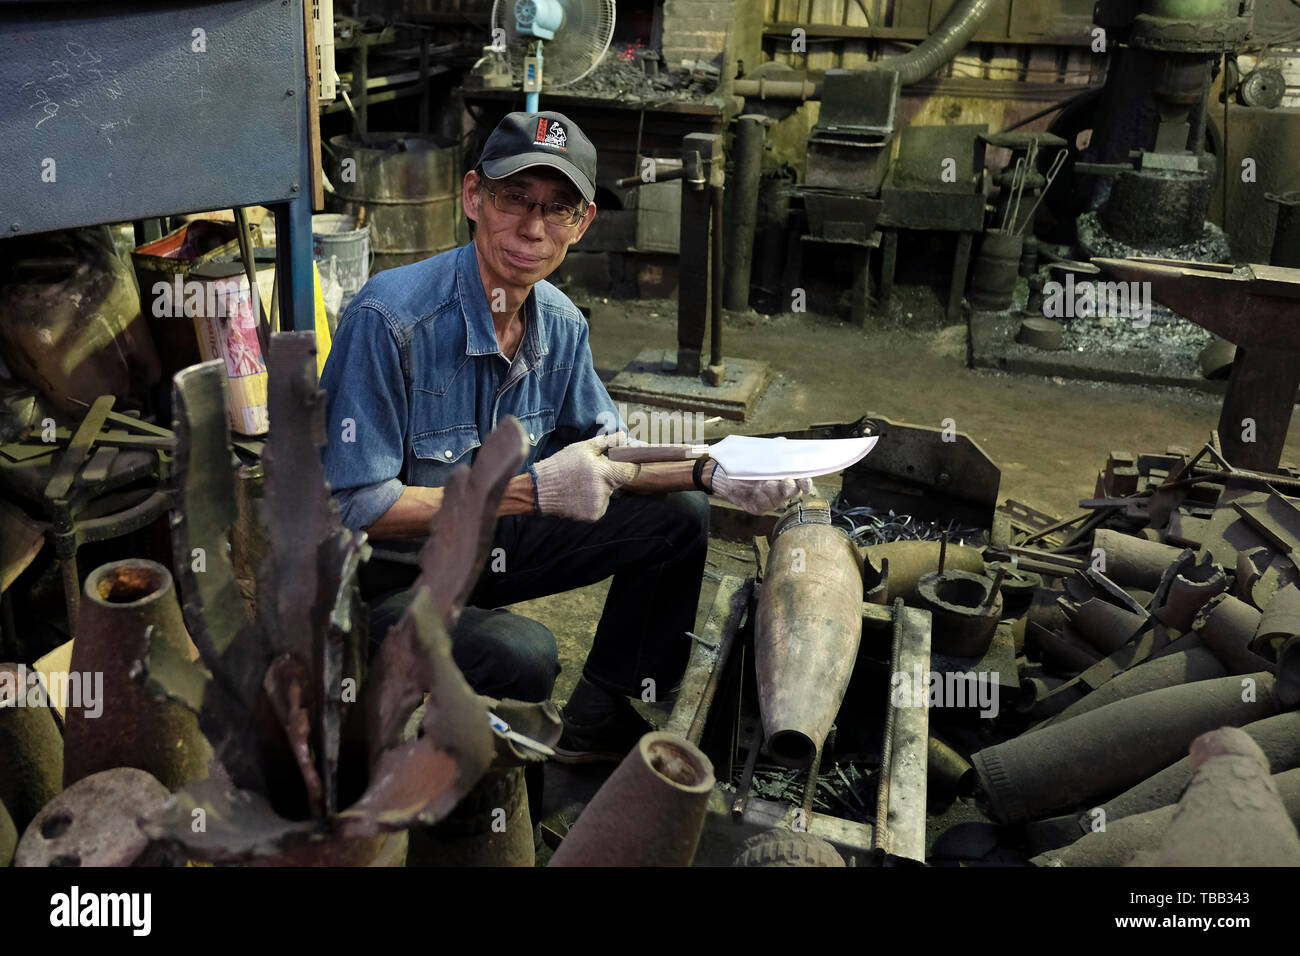 https://c8.alamy.com/comp/TBB343/taiwanese-blacksmith-wu-tseng-tong-known-as-maestro-wu-crafts-a-knife-from-recovered-artillery-shells-in-kinmen-county-or-island-few-miles-from-mainland-china-taiwan-back-in-the-1950s-the-islands-were-heavily-shelled-during-the-two-taiwan-strait-crisesmilitary-clashes-between-the-prc-and-roc-TBB343.jpg